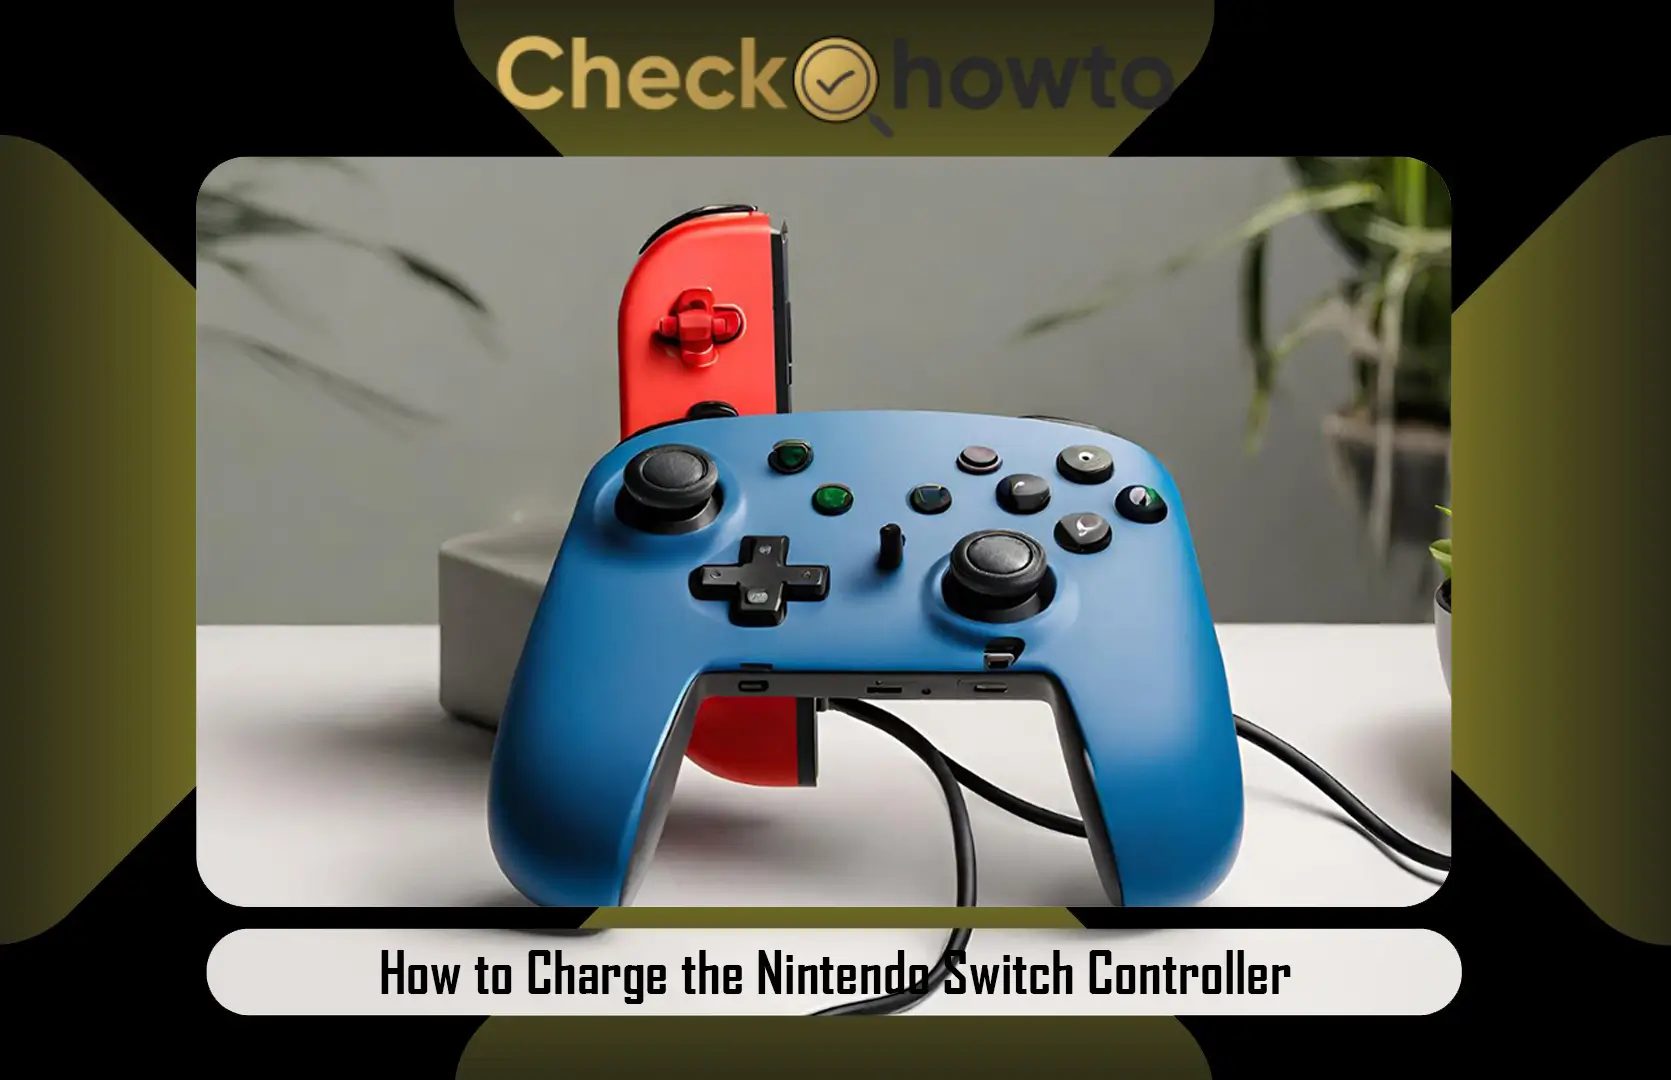 How to Charge the Nintendo Switch Controller